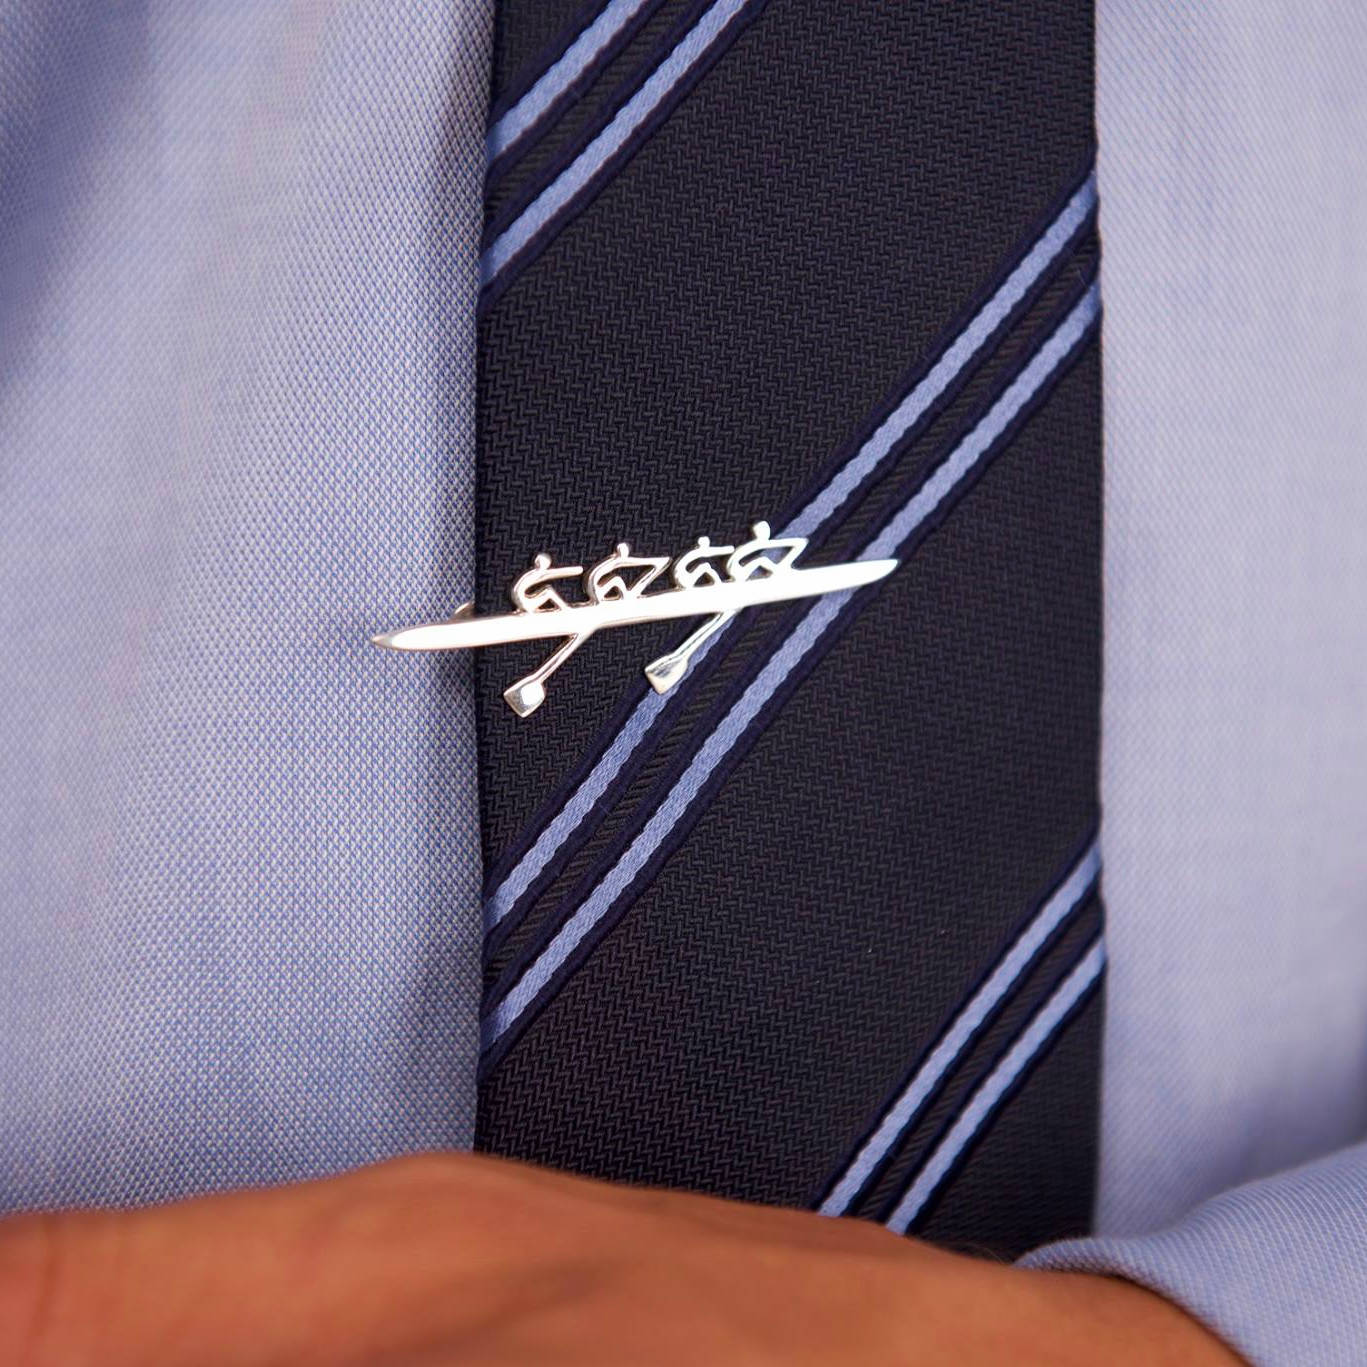 Rowing Four Tie Tack - Strokeside Designs Rowing jewelry- Rowing Gifts Ideas- Rowing Coach Gifts